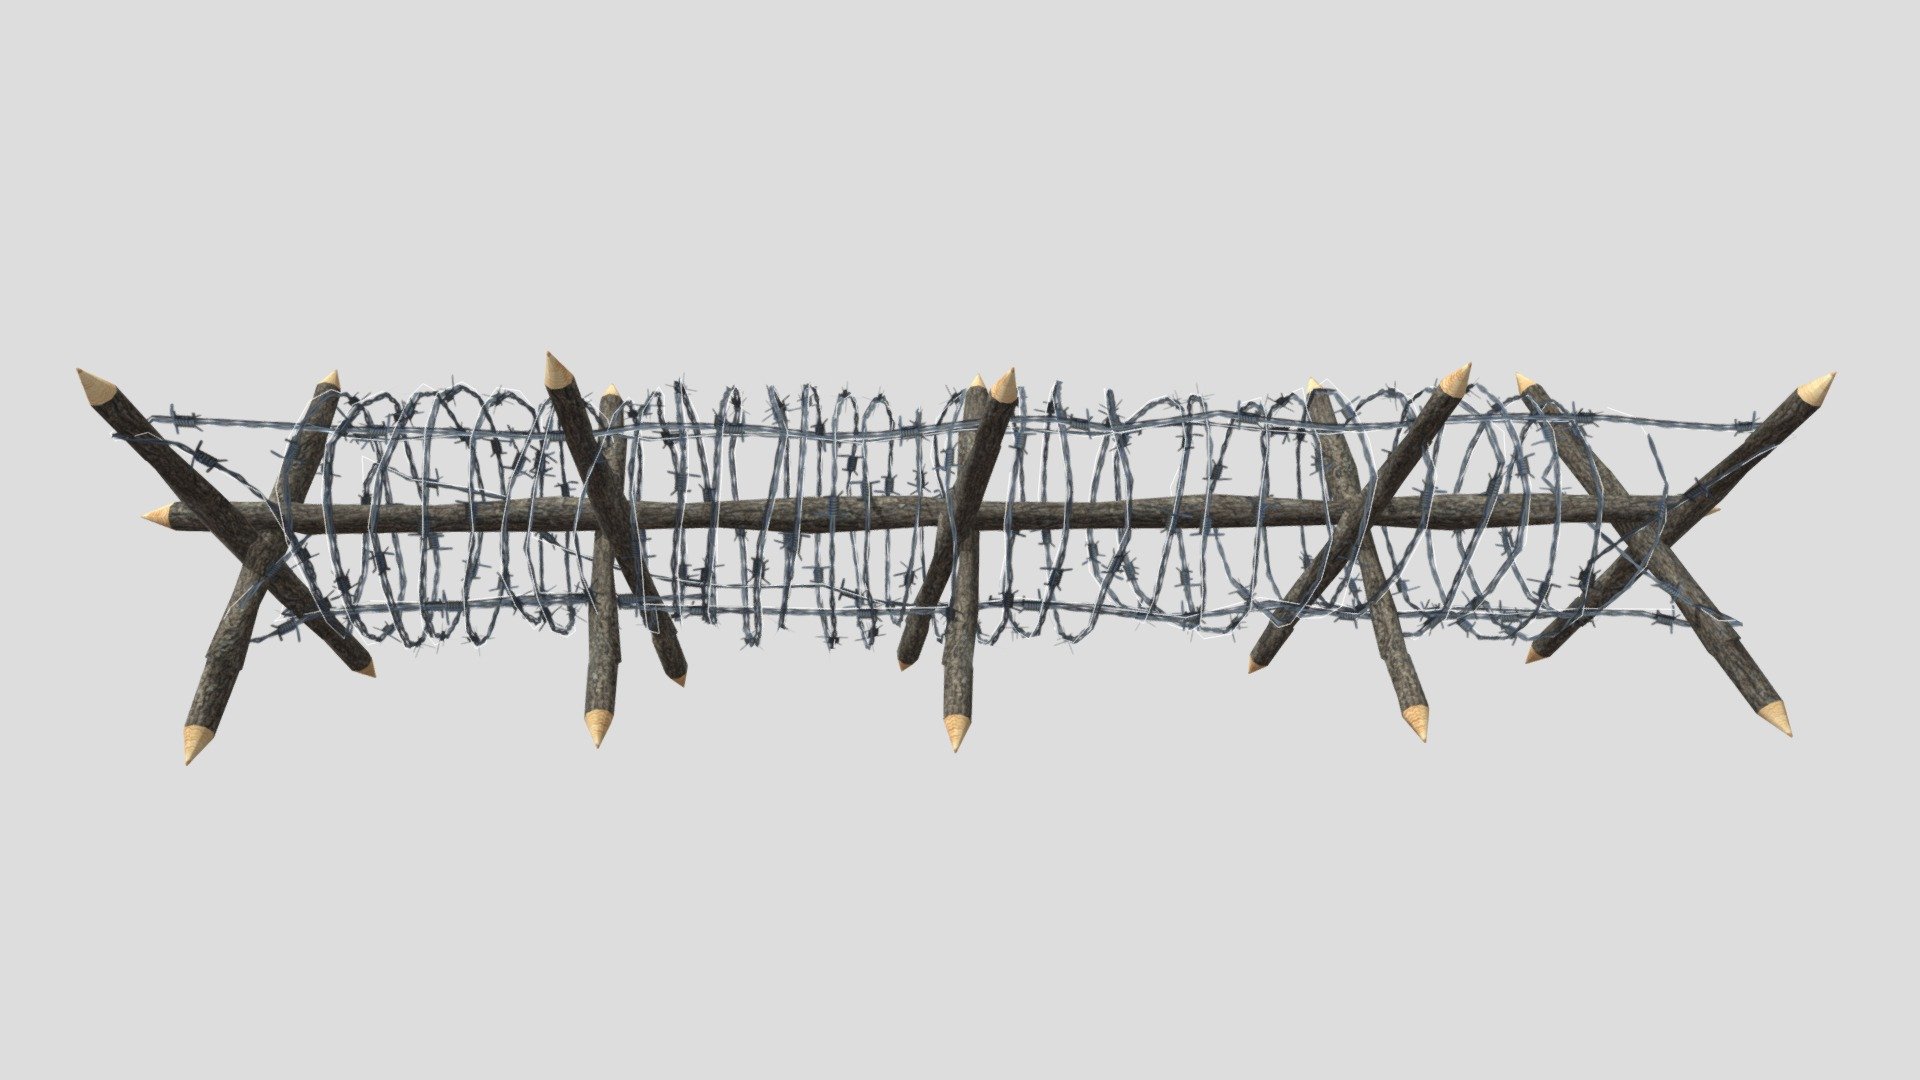 A very accurate model of a Low Poly Barbed Wire Obstacle.

The model comes in five formats:
-.blend, rendered with cycles, as seen in the images;
-.obj, with materials applied and textures;
-.dae, with materials applied and textures;
-.fbx, with material slots applied;
-.stl;

The obstacle is in low poly, the barb is created using plane images.
Depending on the 3D Software program used, slight material tweaking might be needed.
This 3d model was originally created in Blender 2.78 and rendered with Cycles.
The model has materials applied in all formats, and are ready to import and render.
The model is built strictly out of quads and is subdivisable.

For any problems please feel free to contact me.

Don't forget to rate and enjoy! - Lowpoly Barb Wire Obstacle 11 - Buy Royalty Free 3D model by dragosburian 3d model